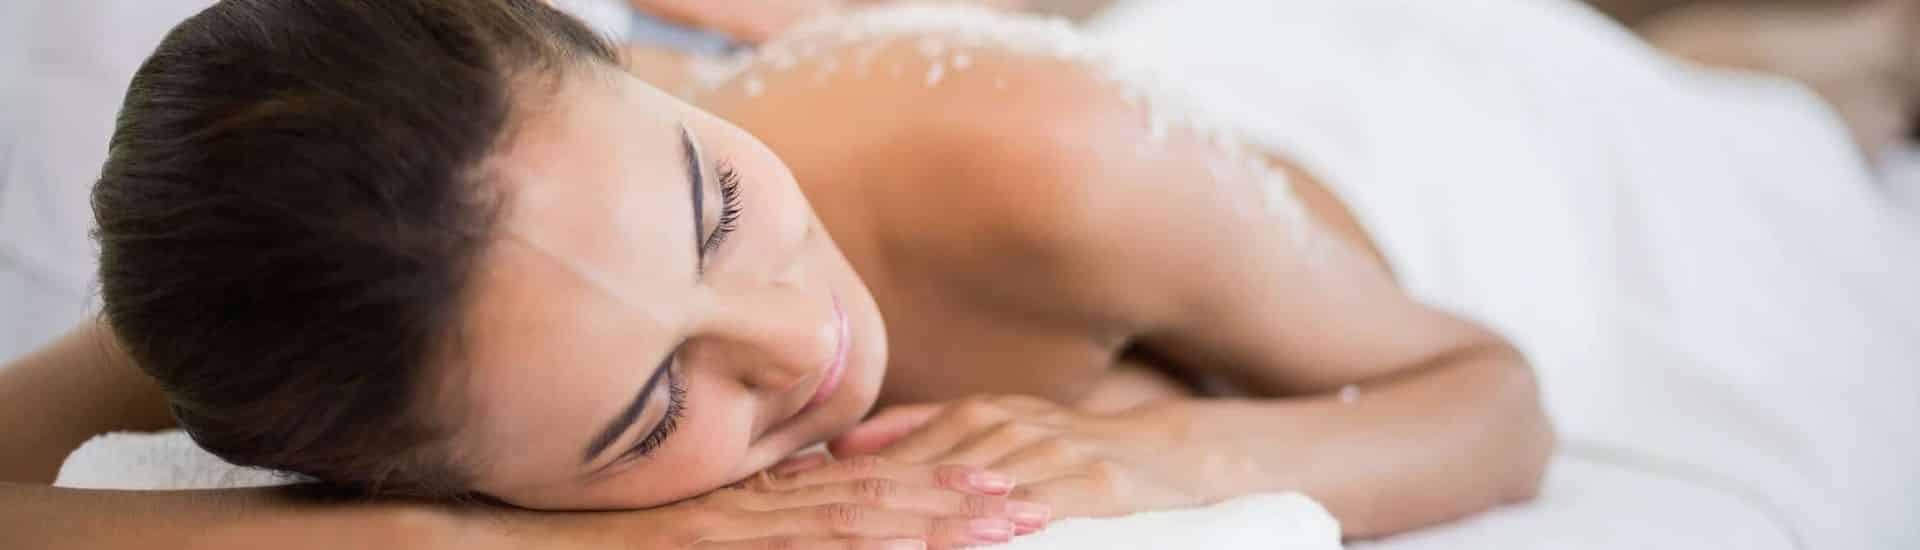 Close up view of woman laying on white table covered in white towel getting a spa treatment